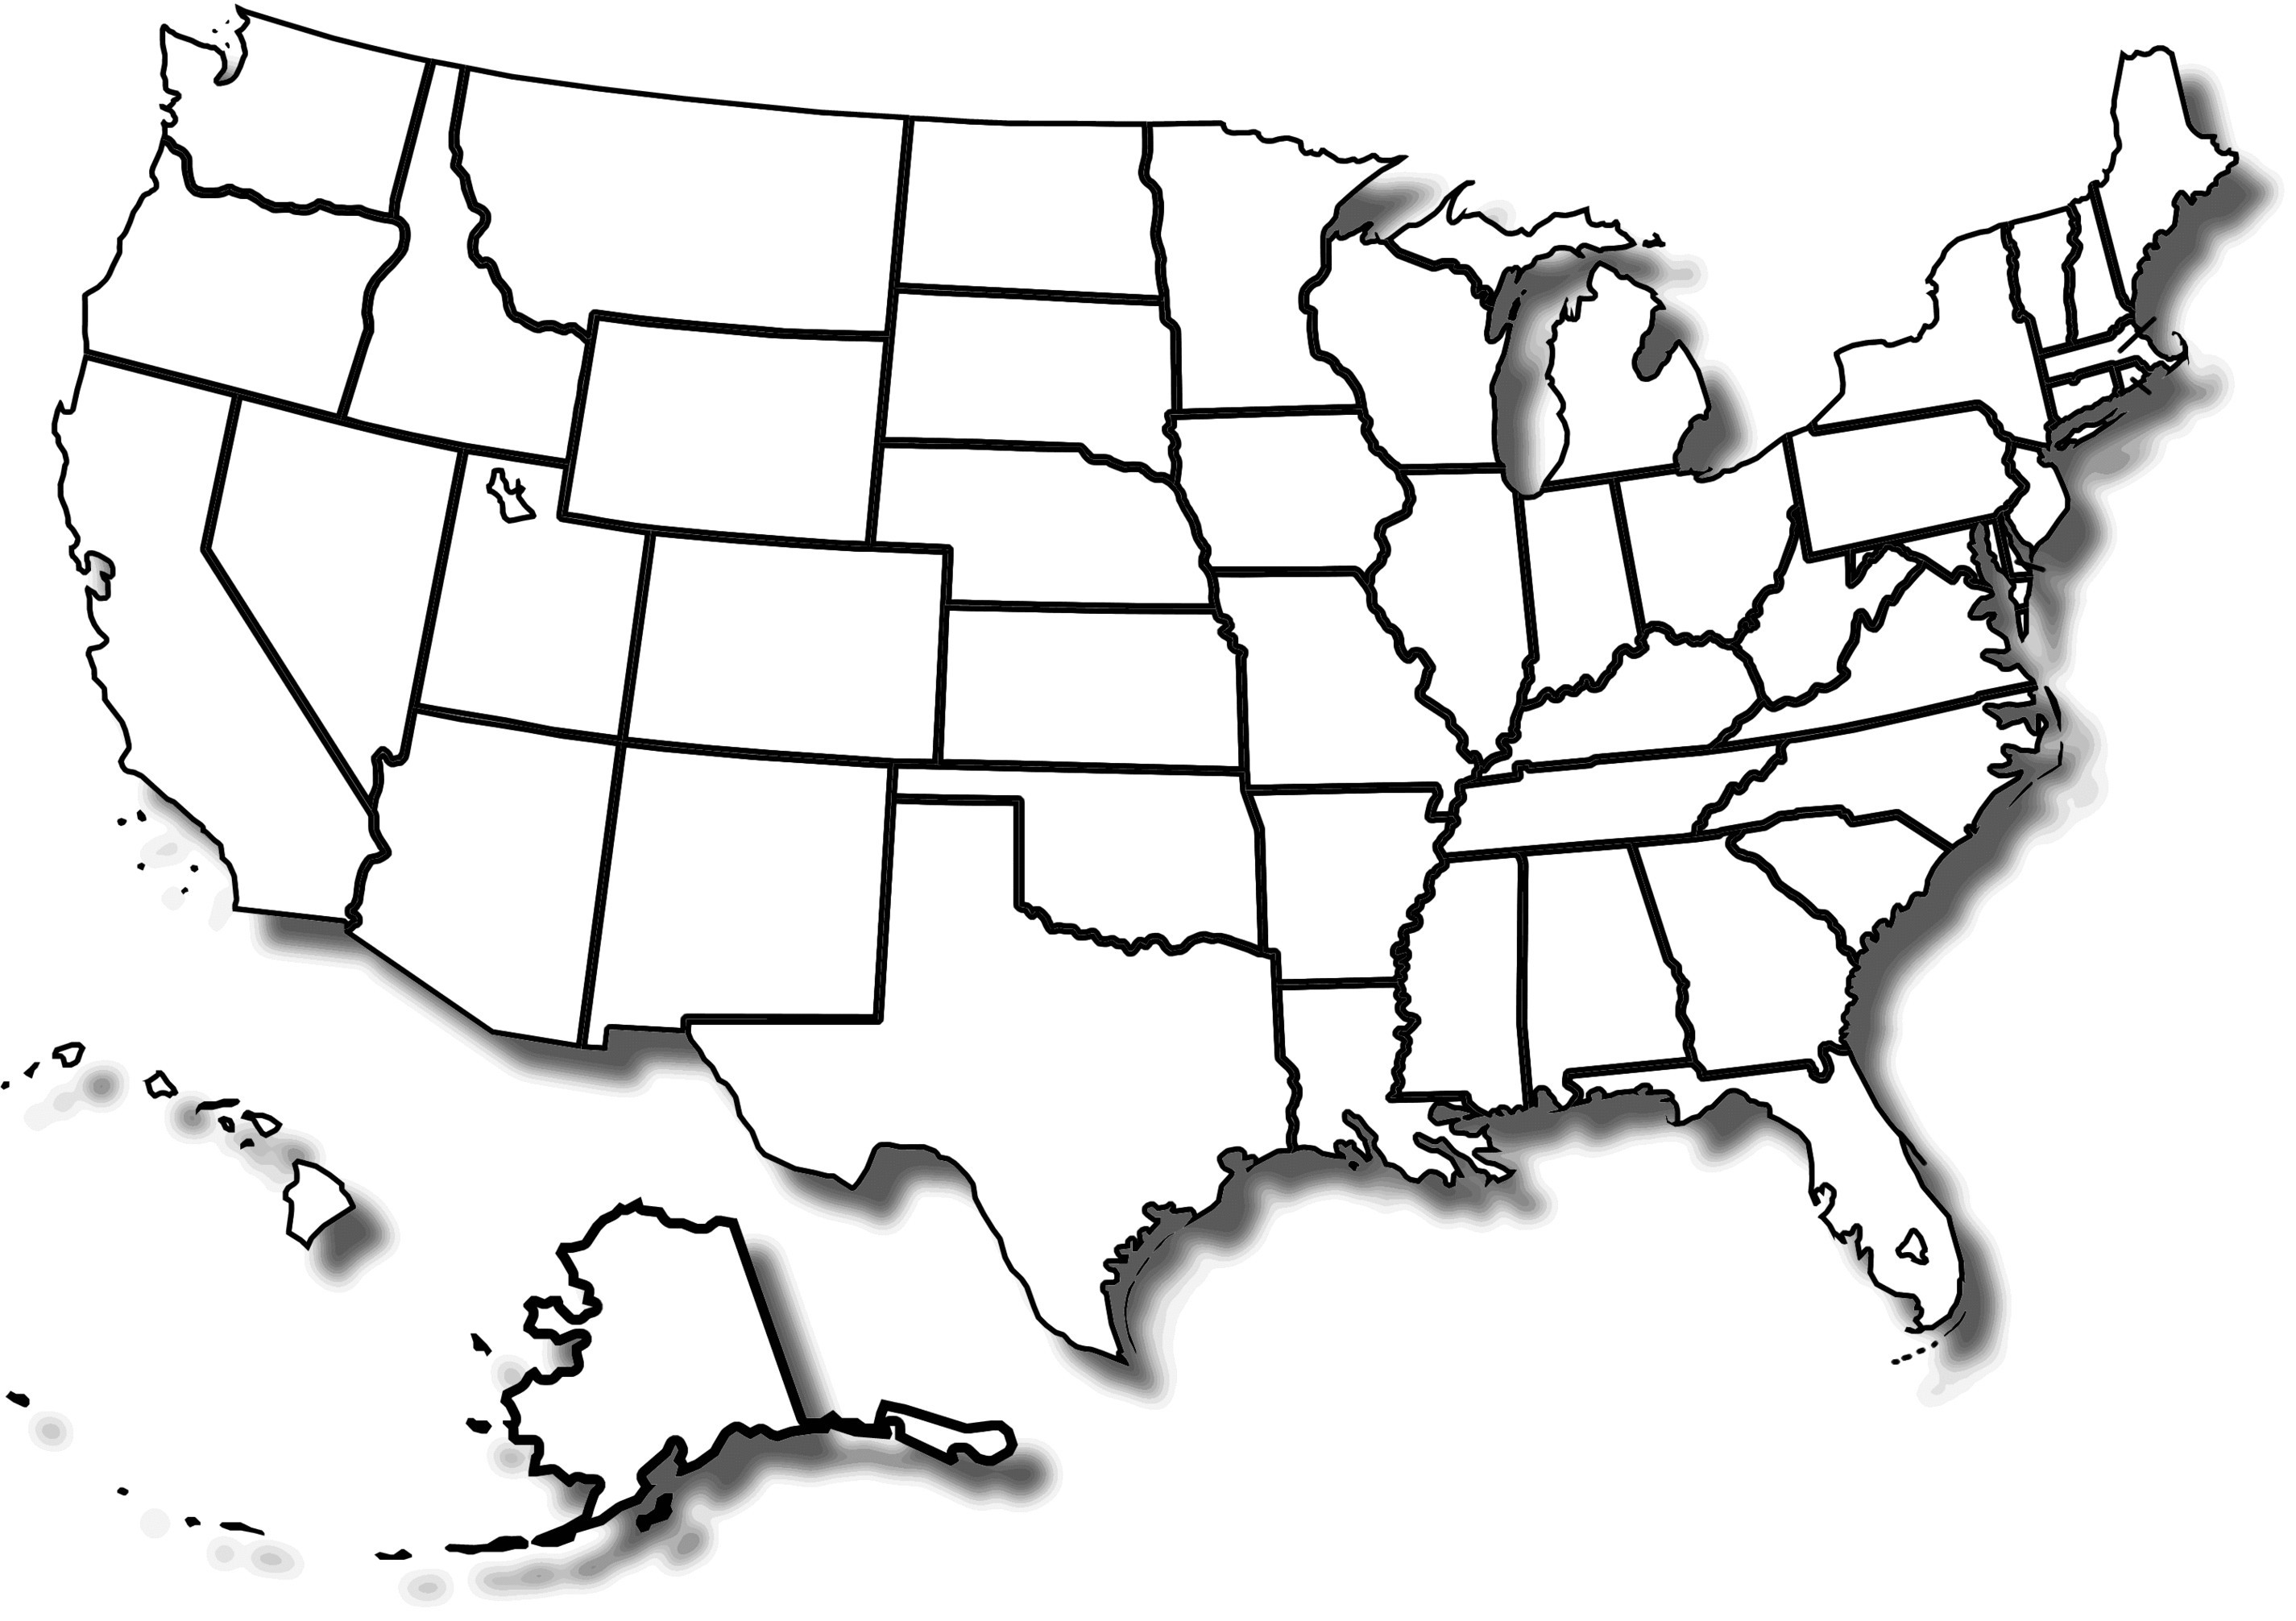 america clipart map us